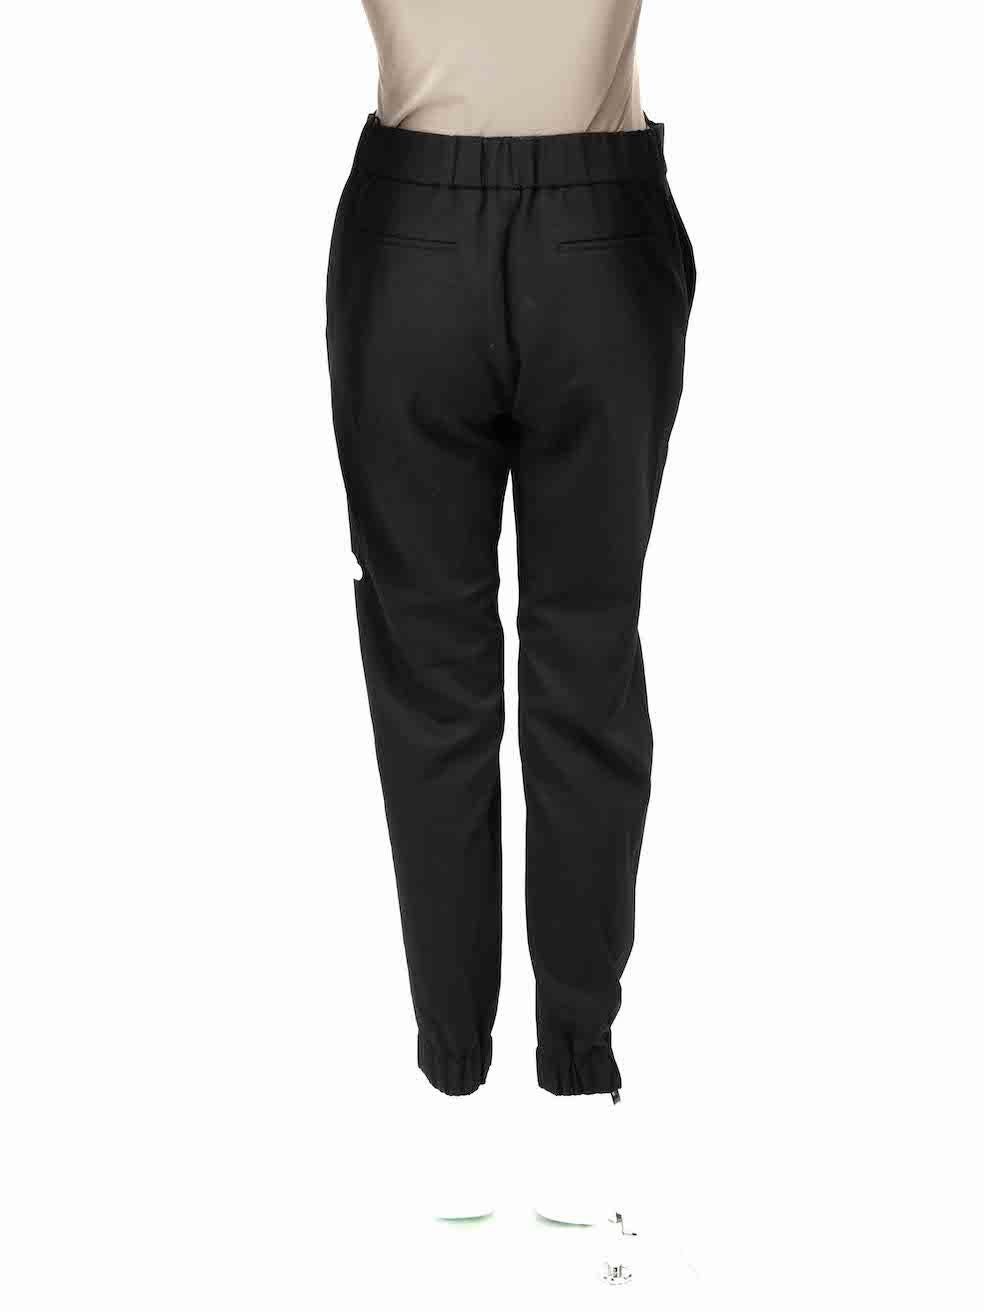 Kenzo Black Wool High Waist Tapered Trousers Size XS In Good Condition For Sale In London, GB